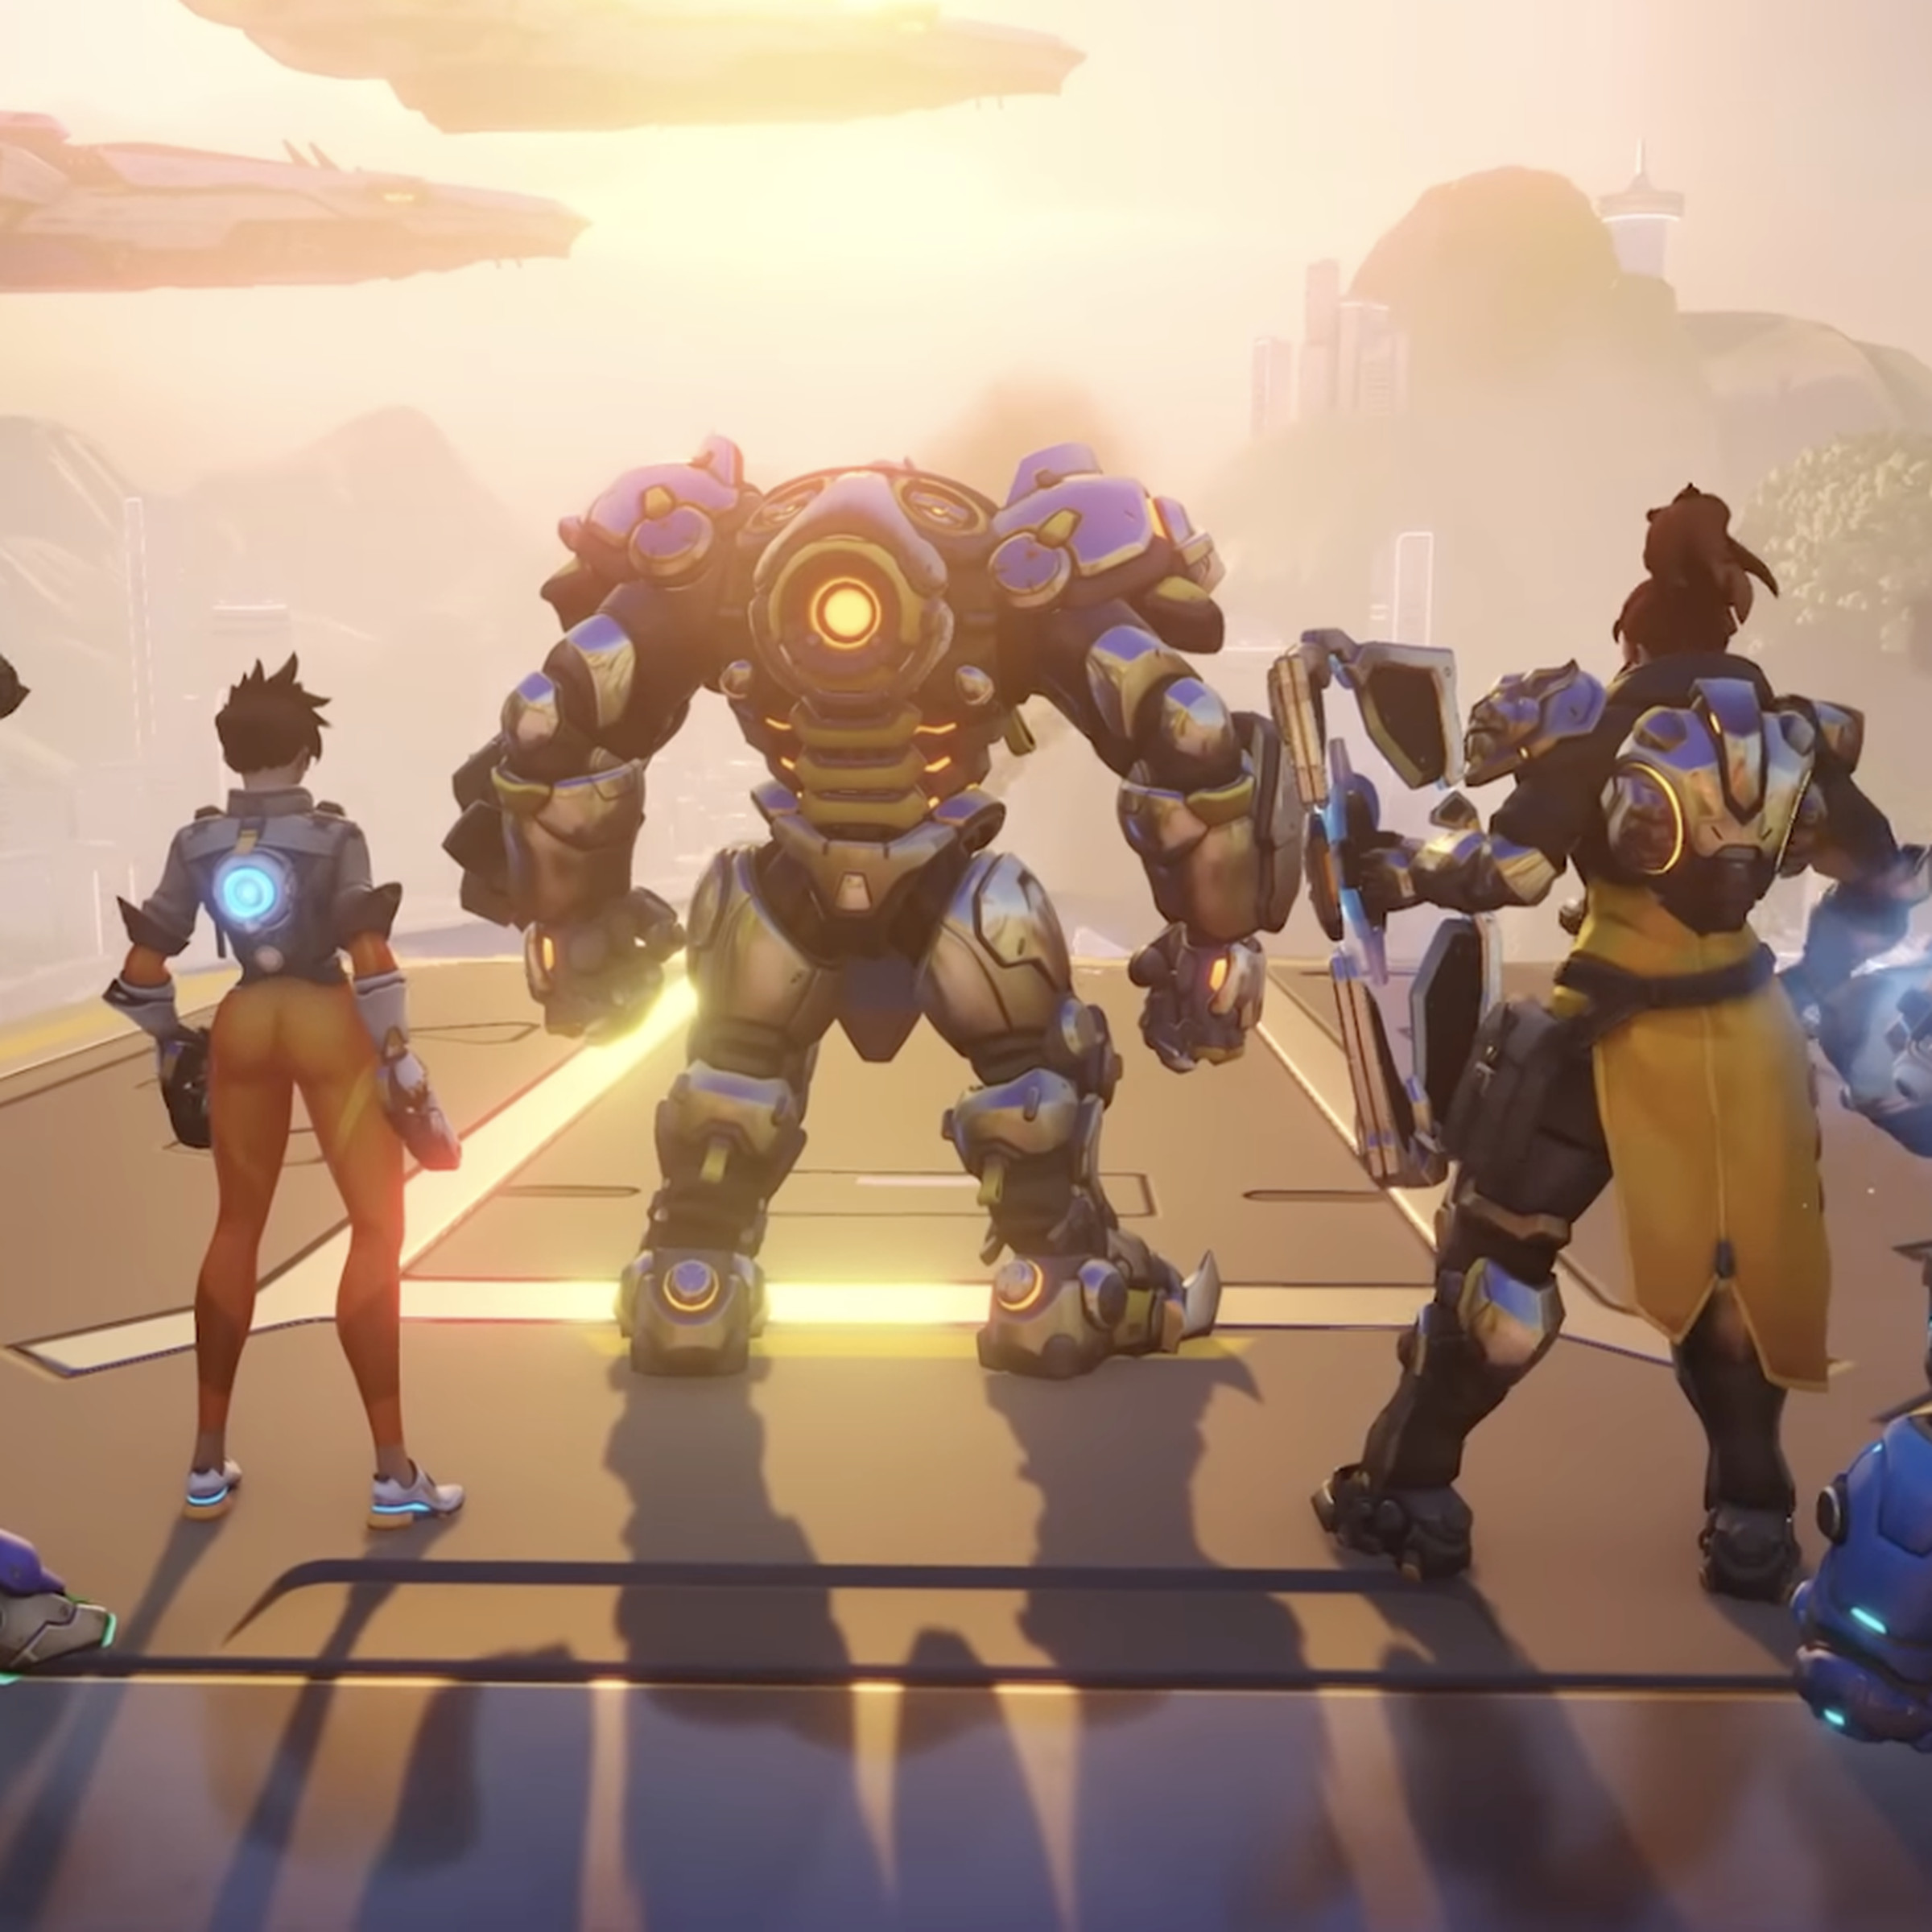 Screenshot from Overwatch 2 featuring behind-the-back shots of the game’s most popular heroes